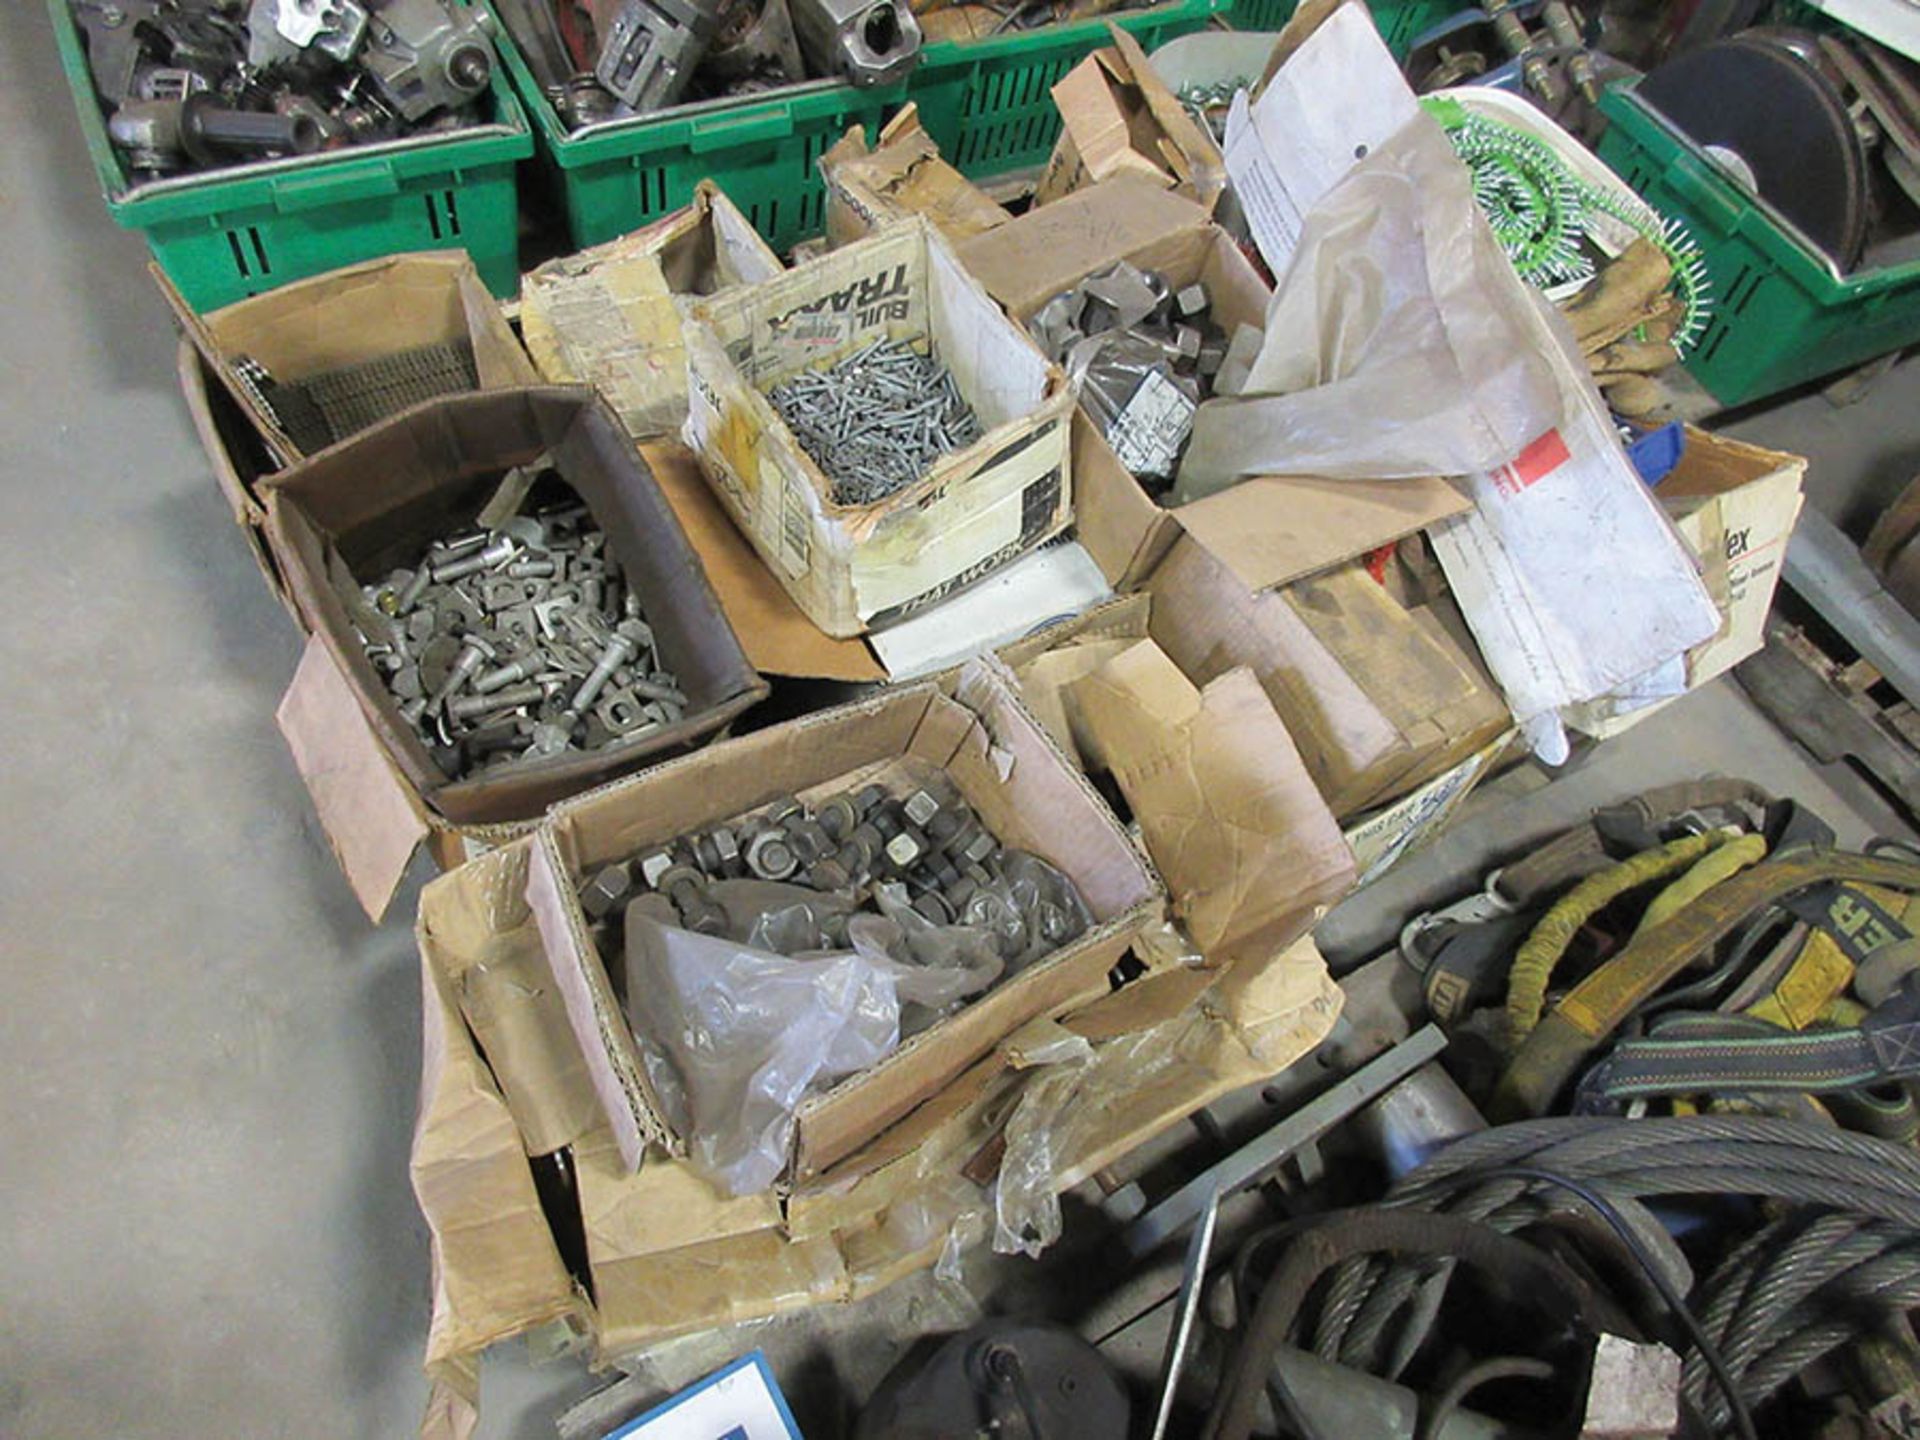 (4) PALLETS OF SPROCKETS, FASTENERS, BRASS TUBE, CHAIN SLINGS, PLATE CLAMPS, HYDRAULIC JACKS, - Image 3 of 4